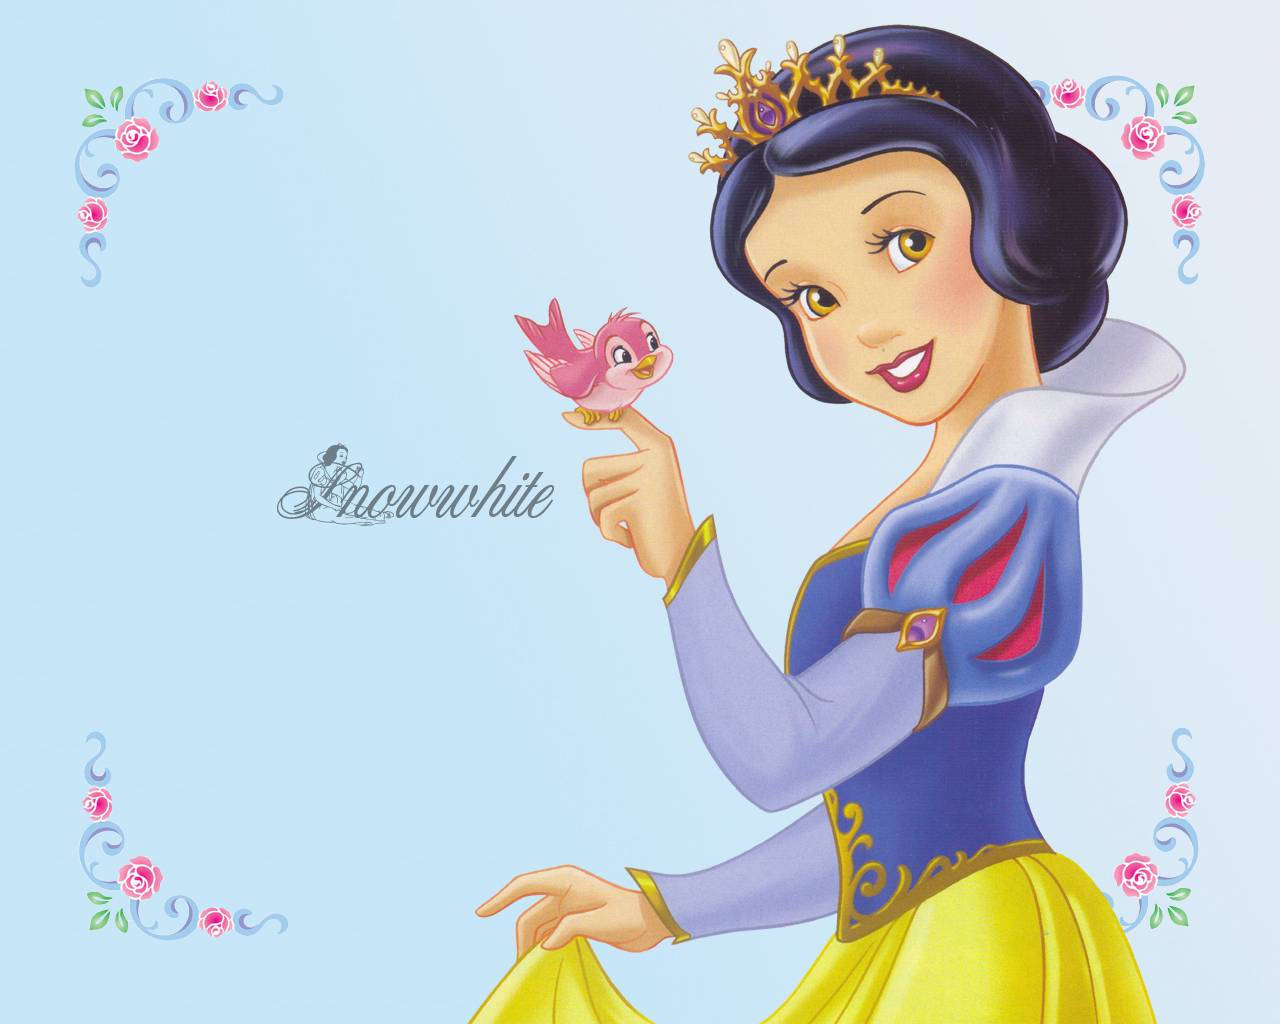 Snow White Graphic Poster